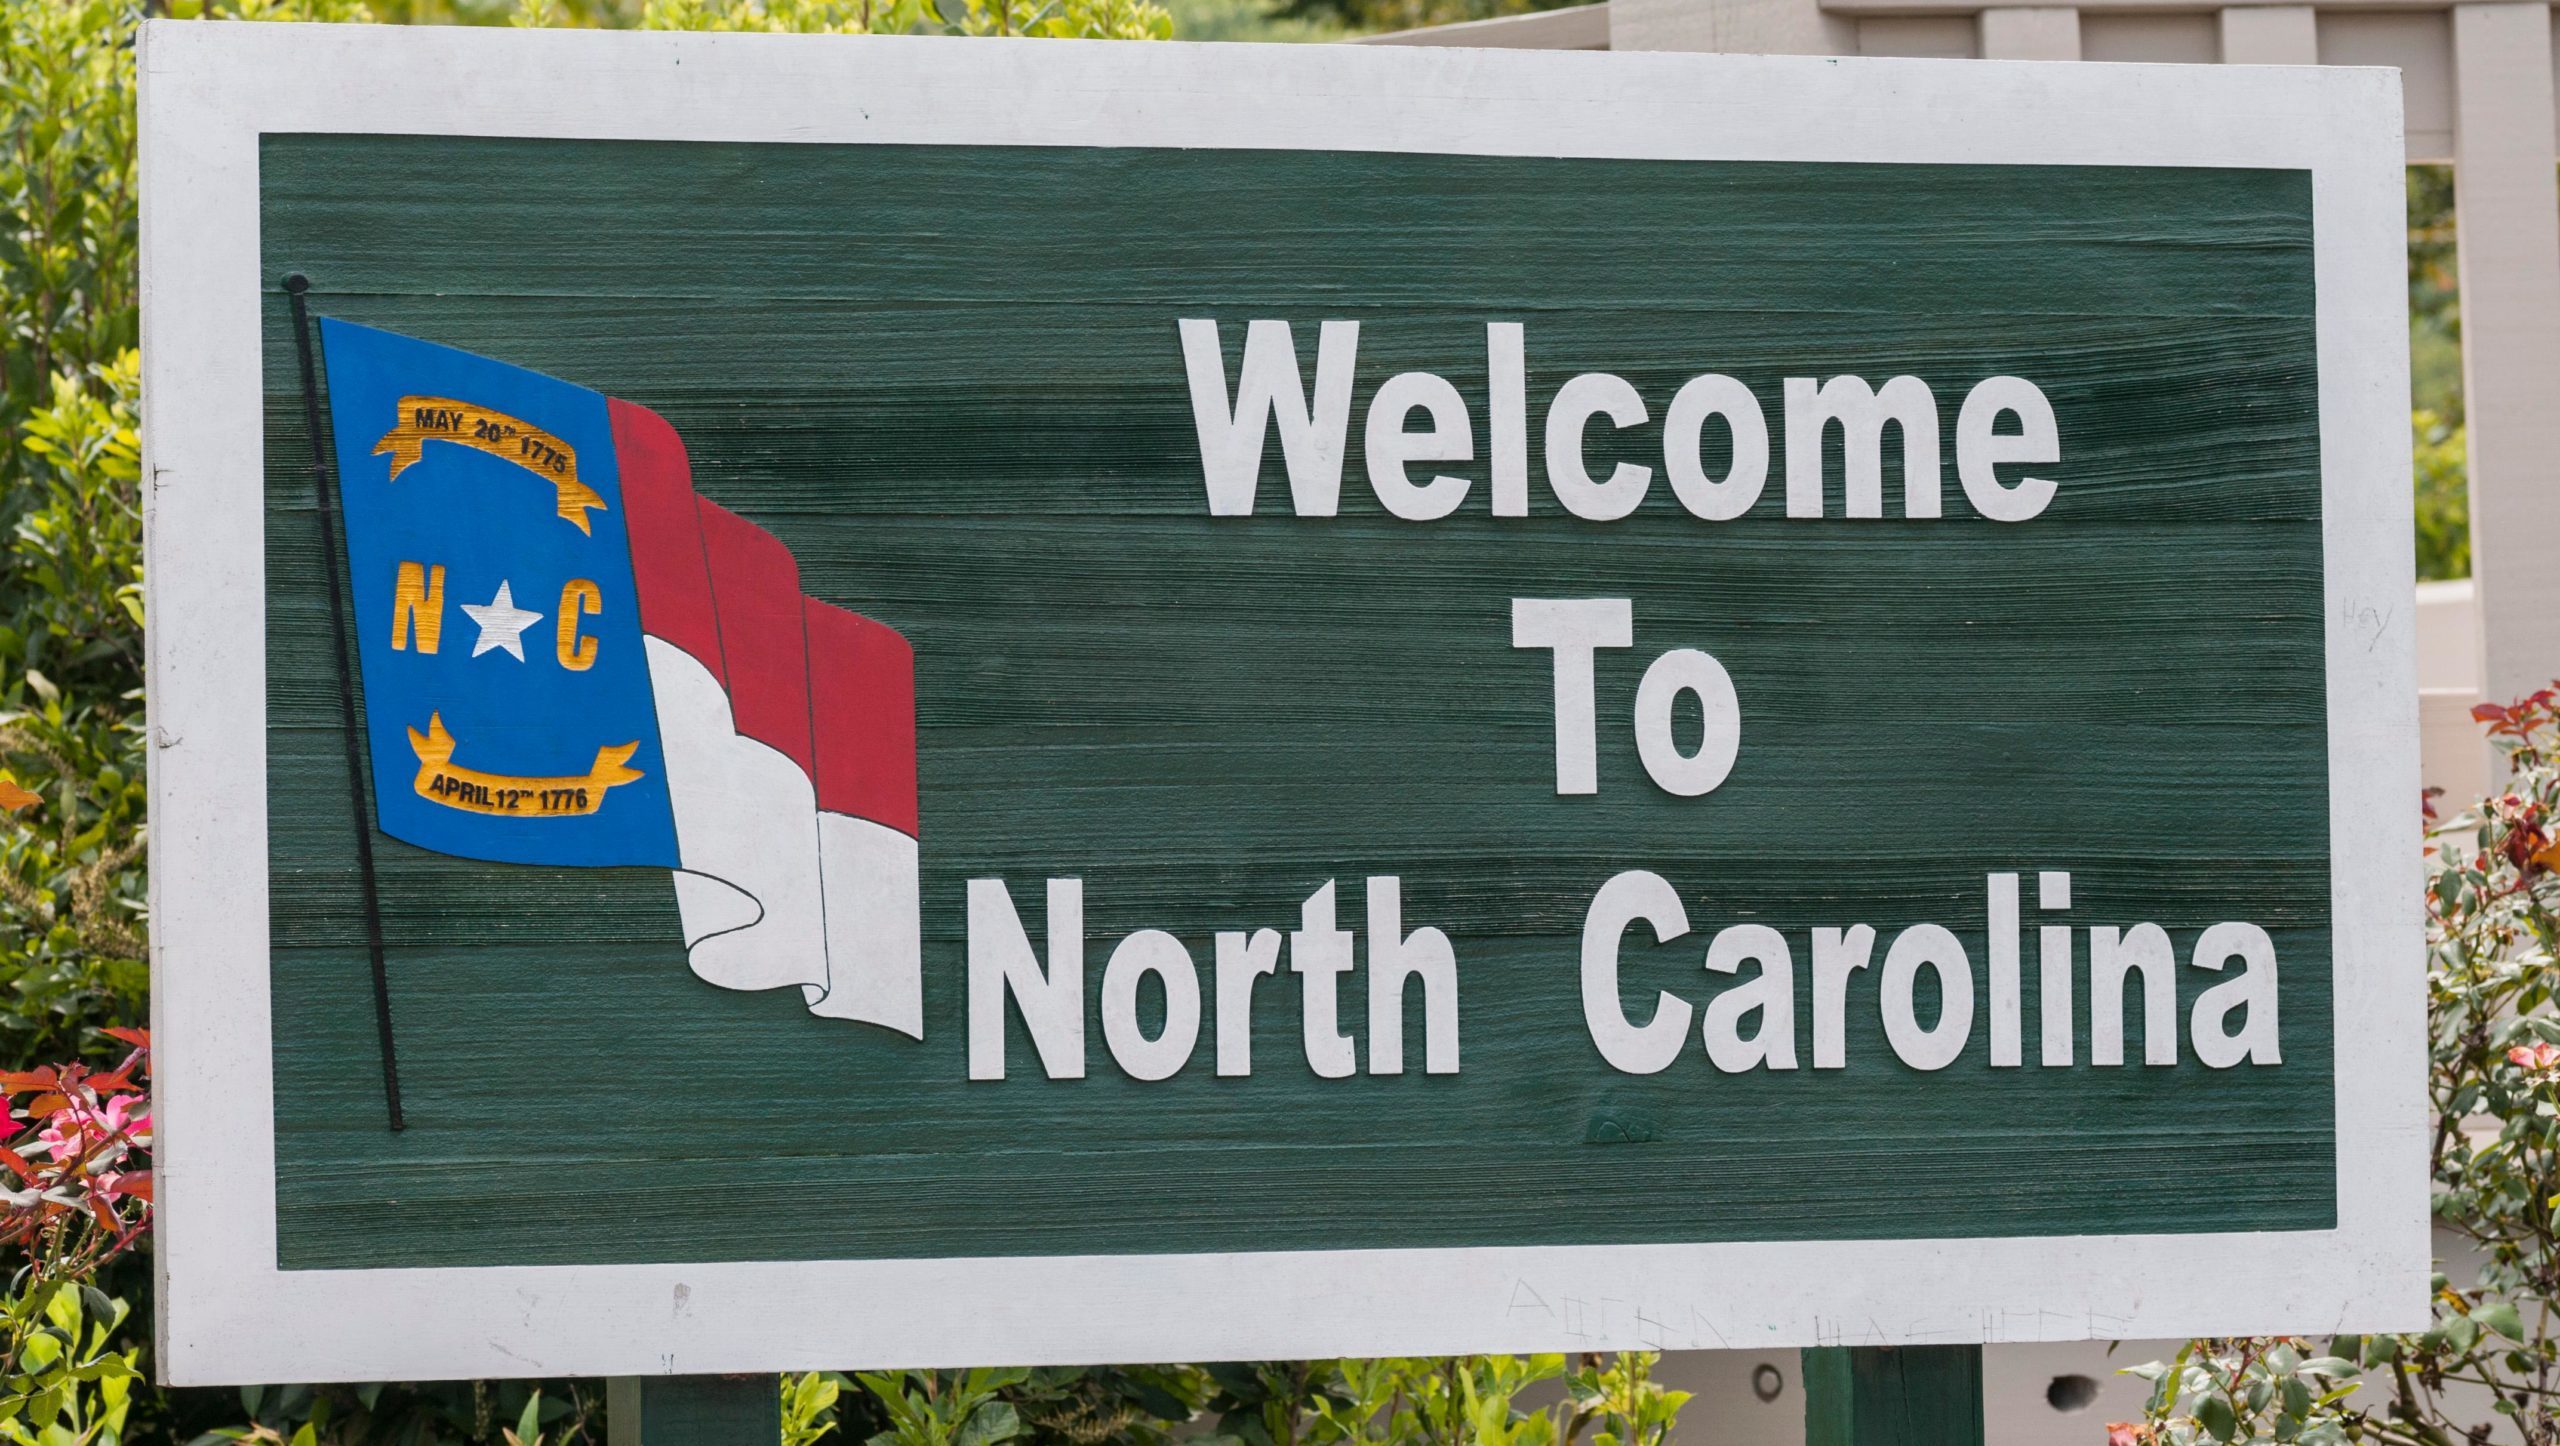 7 Things You Should Not Do With North Carolina Car Insurance